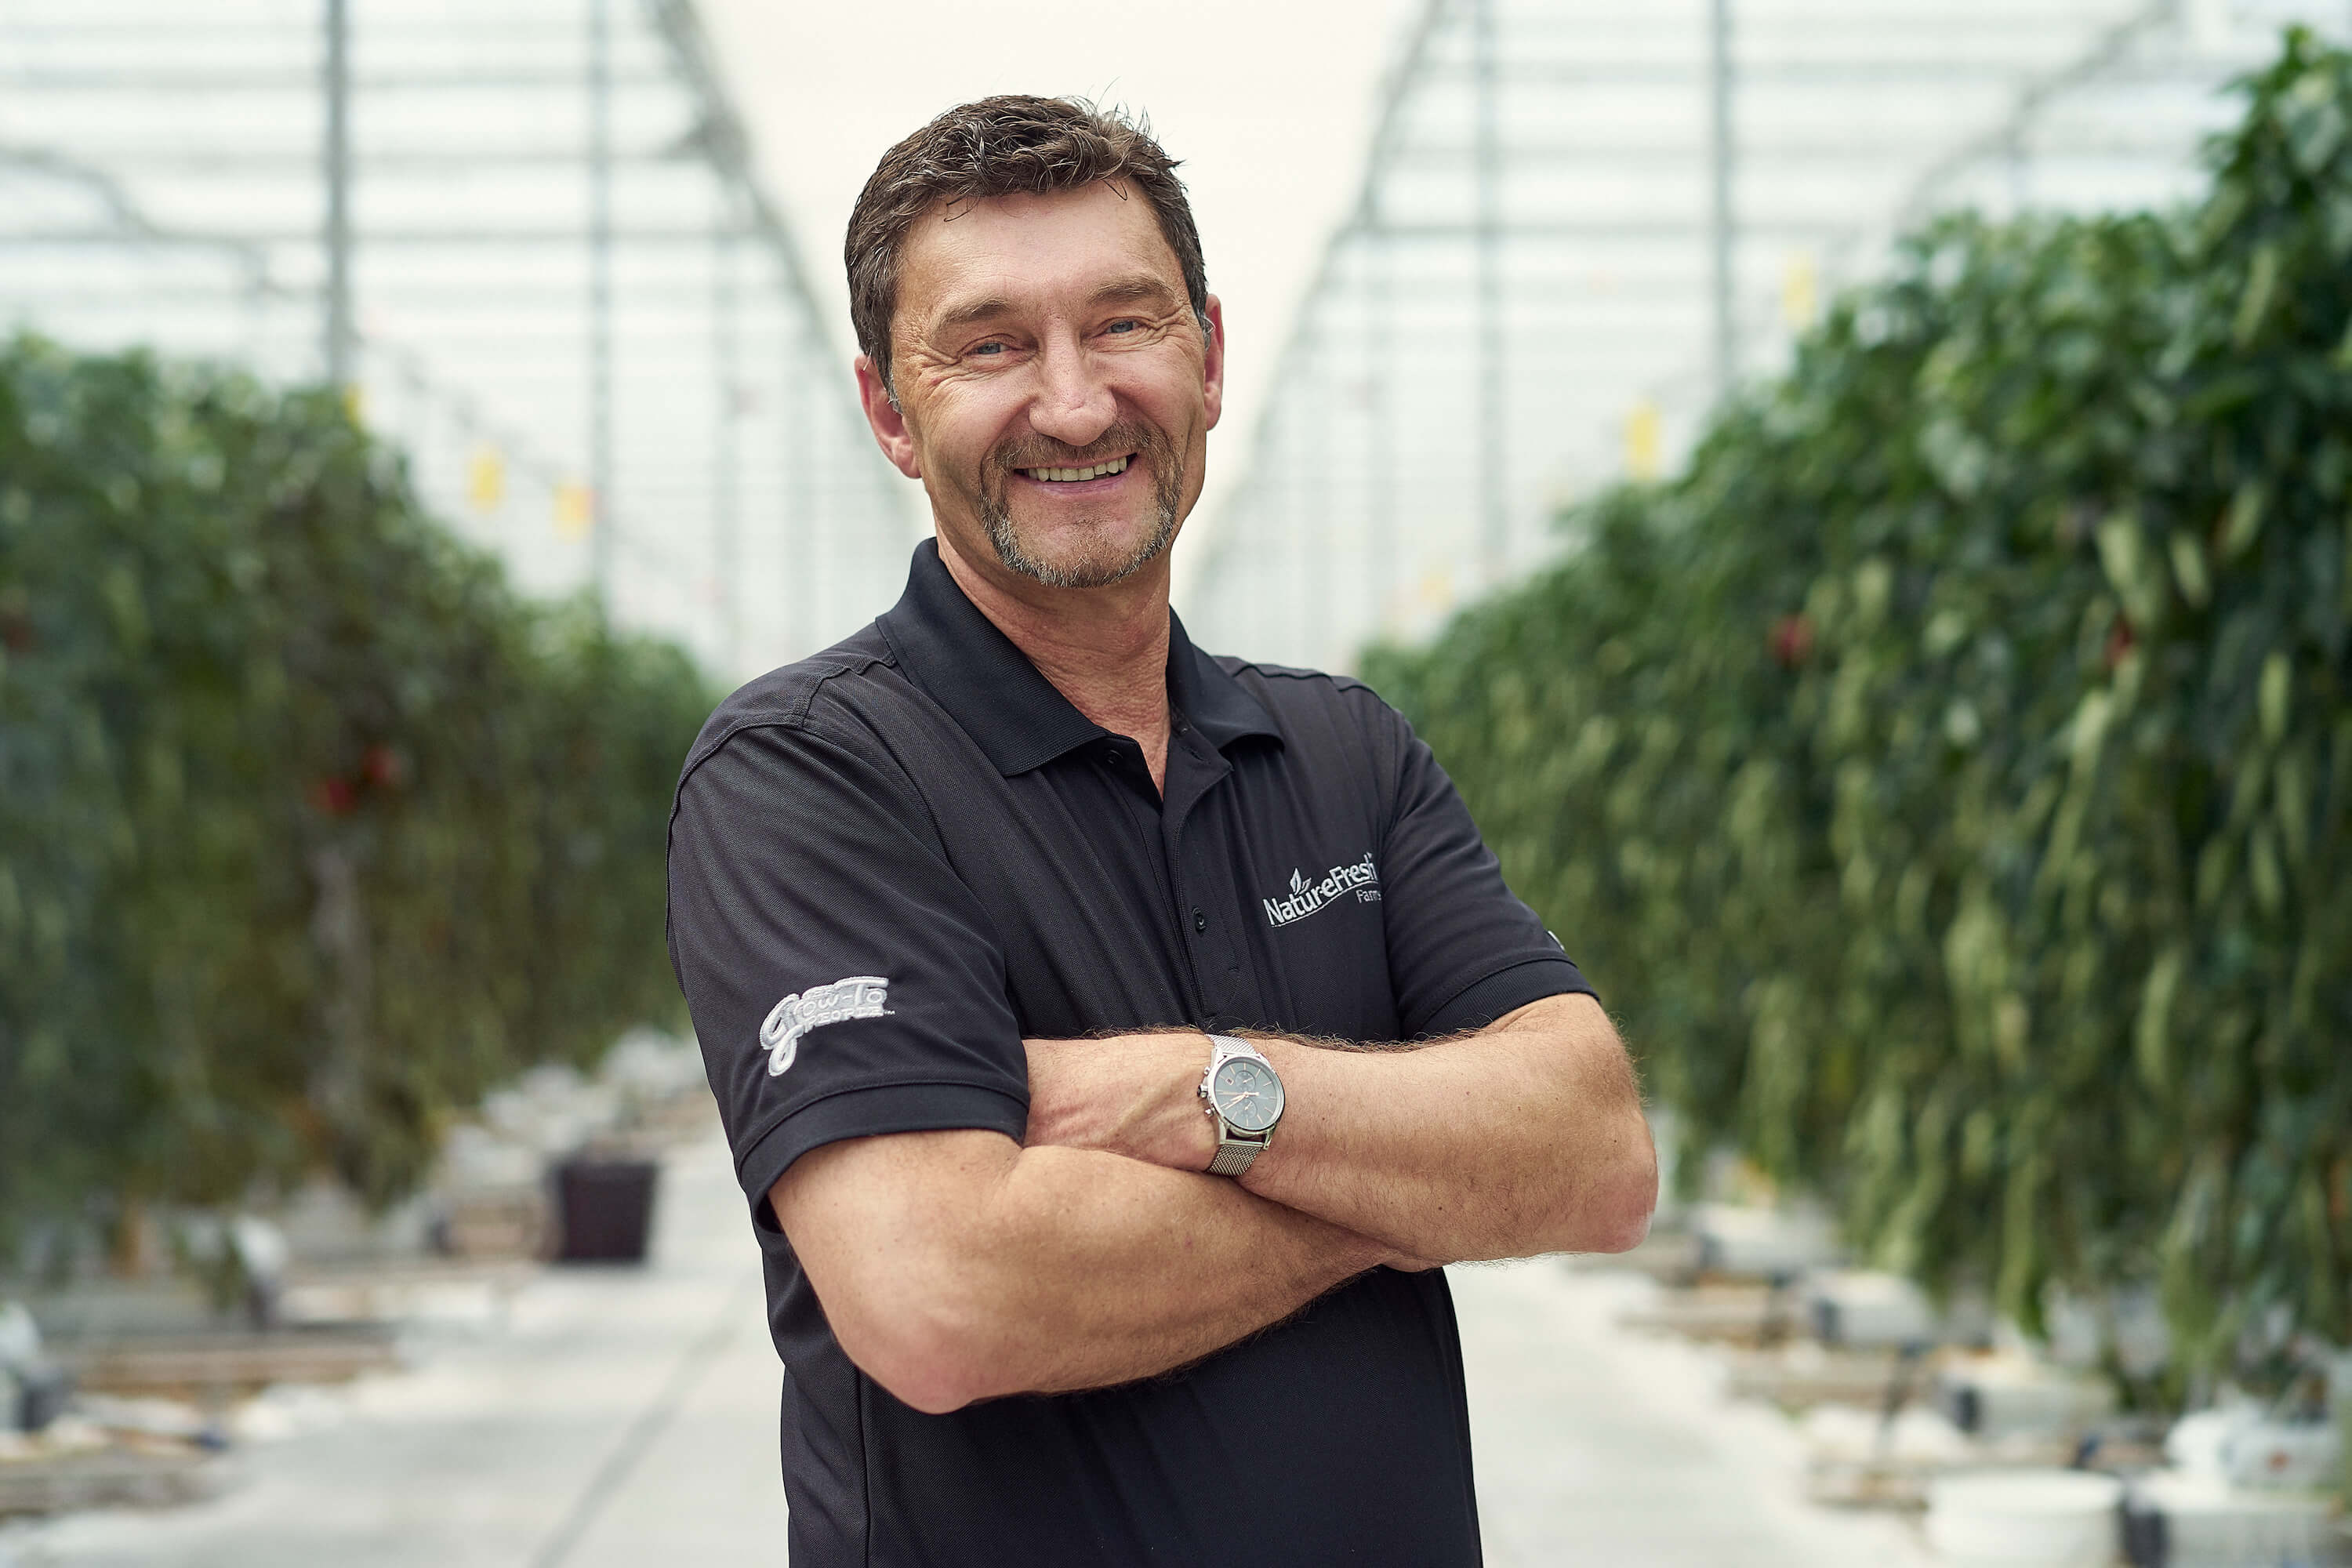 Peter Quiring's contributions to greenhouse technology have advanced the industry significantly